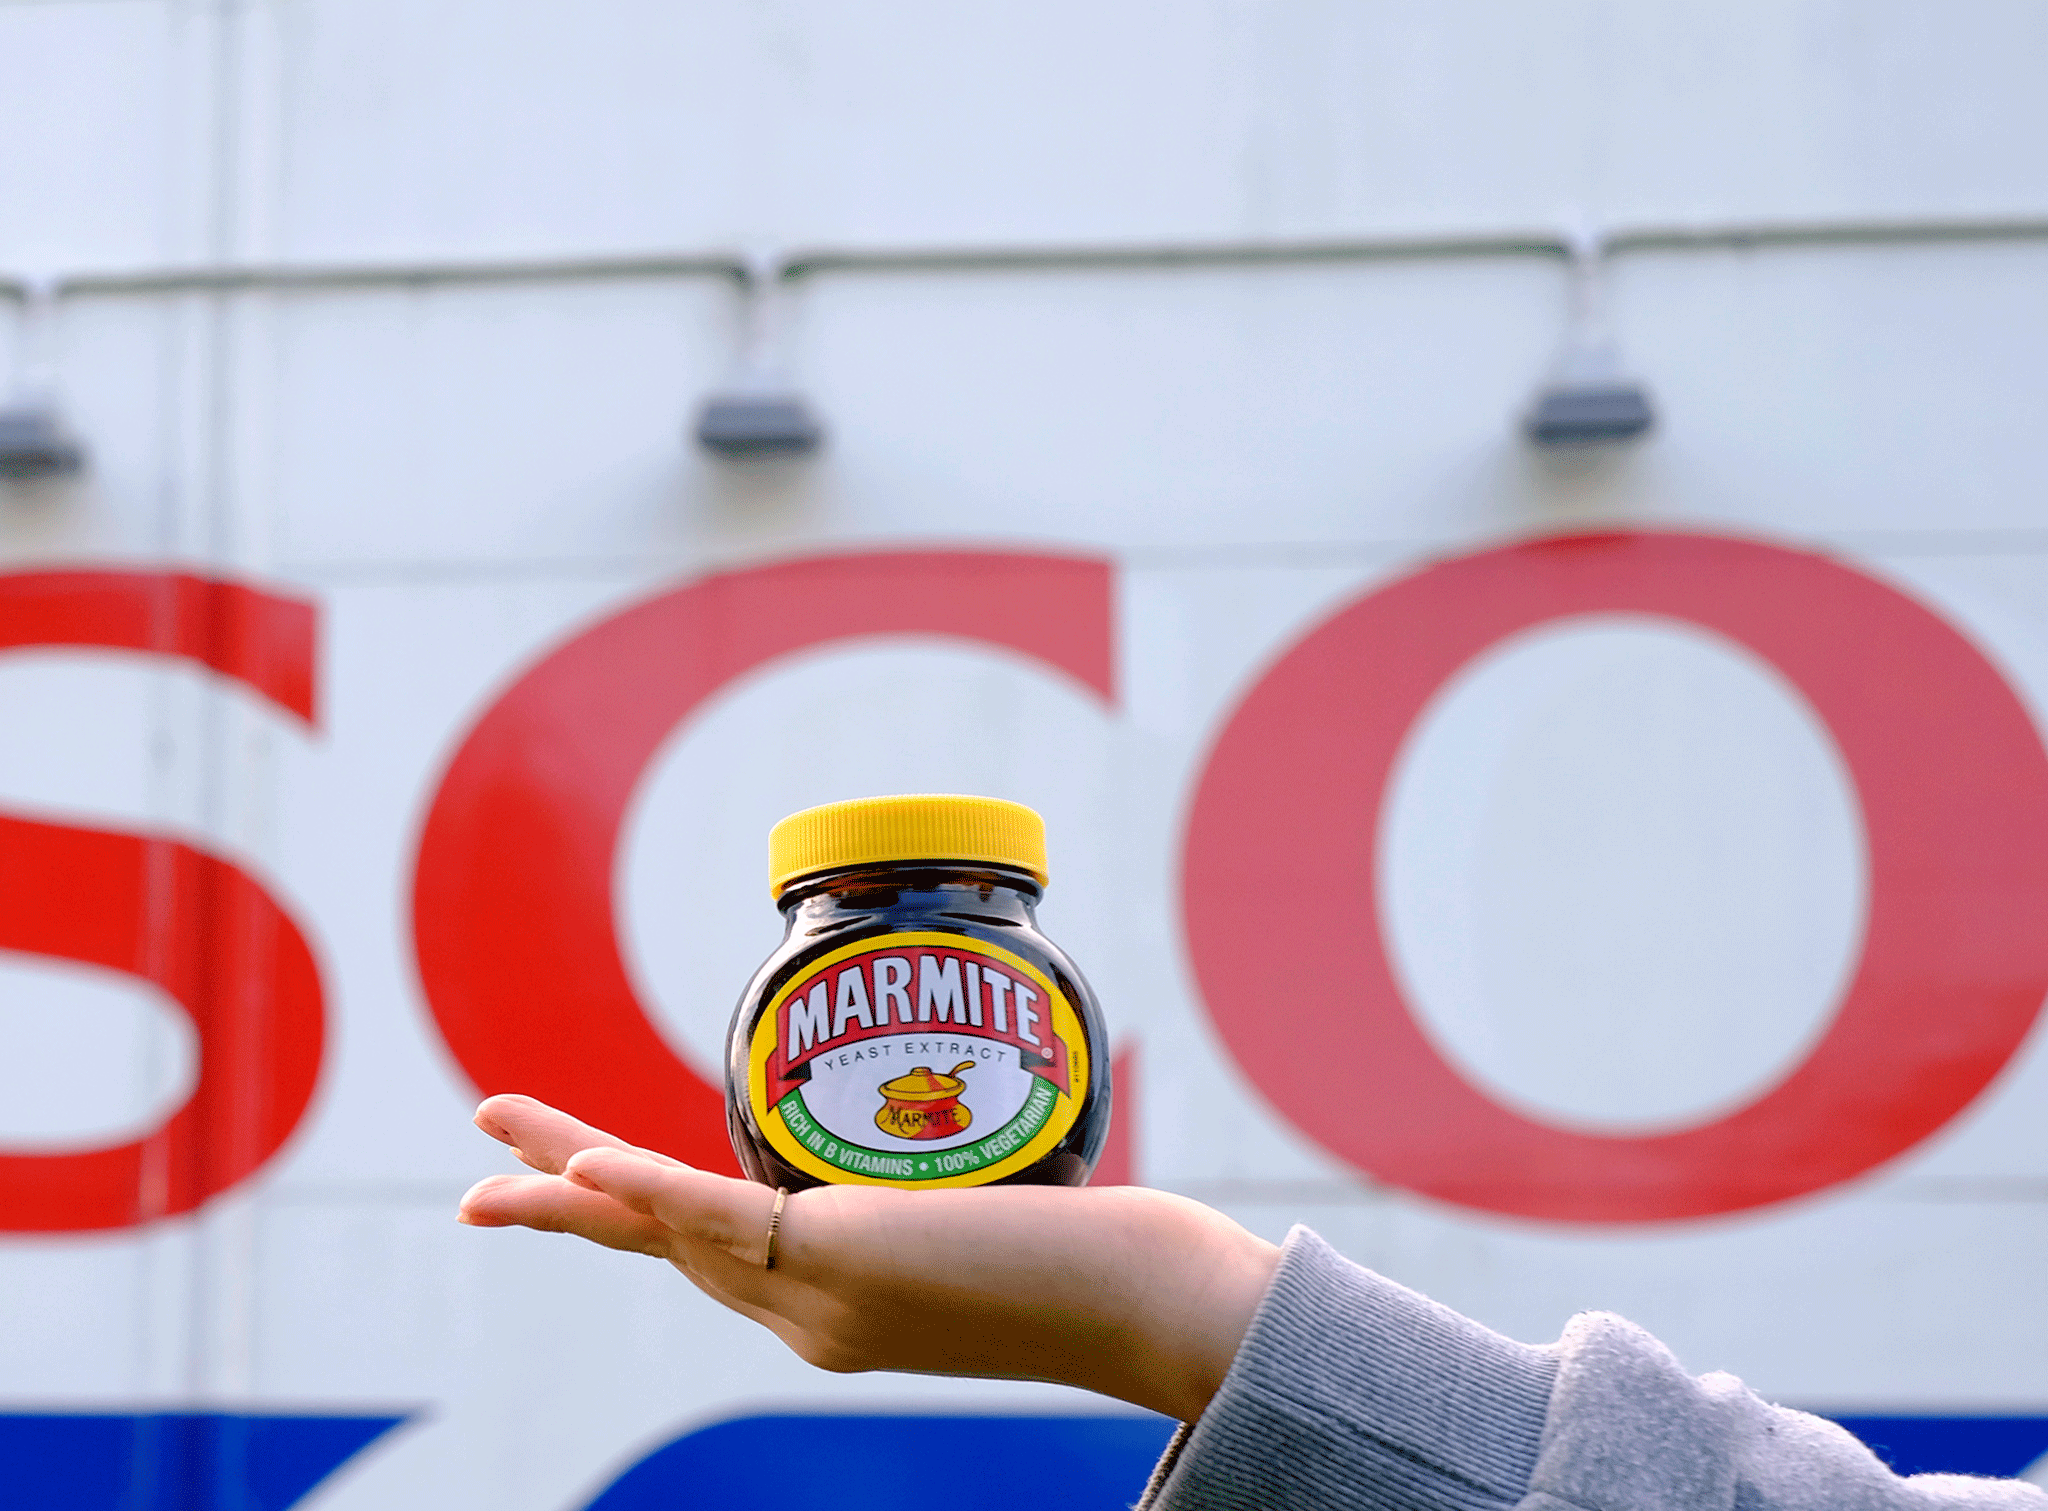 The boss of the brand behind Marmitegate predicts tough market conditions will continue